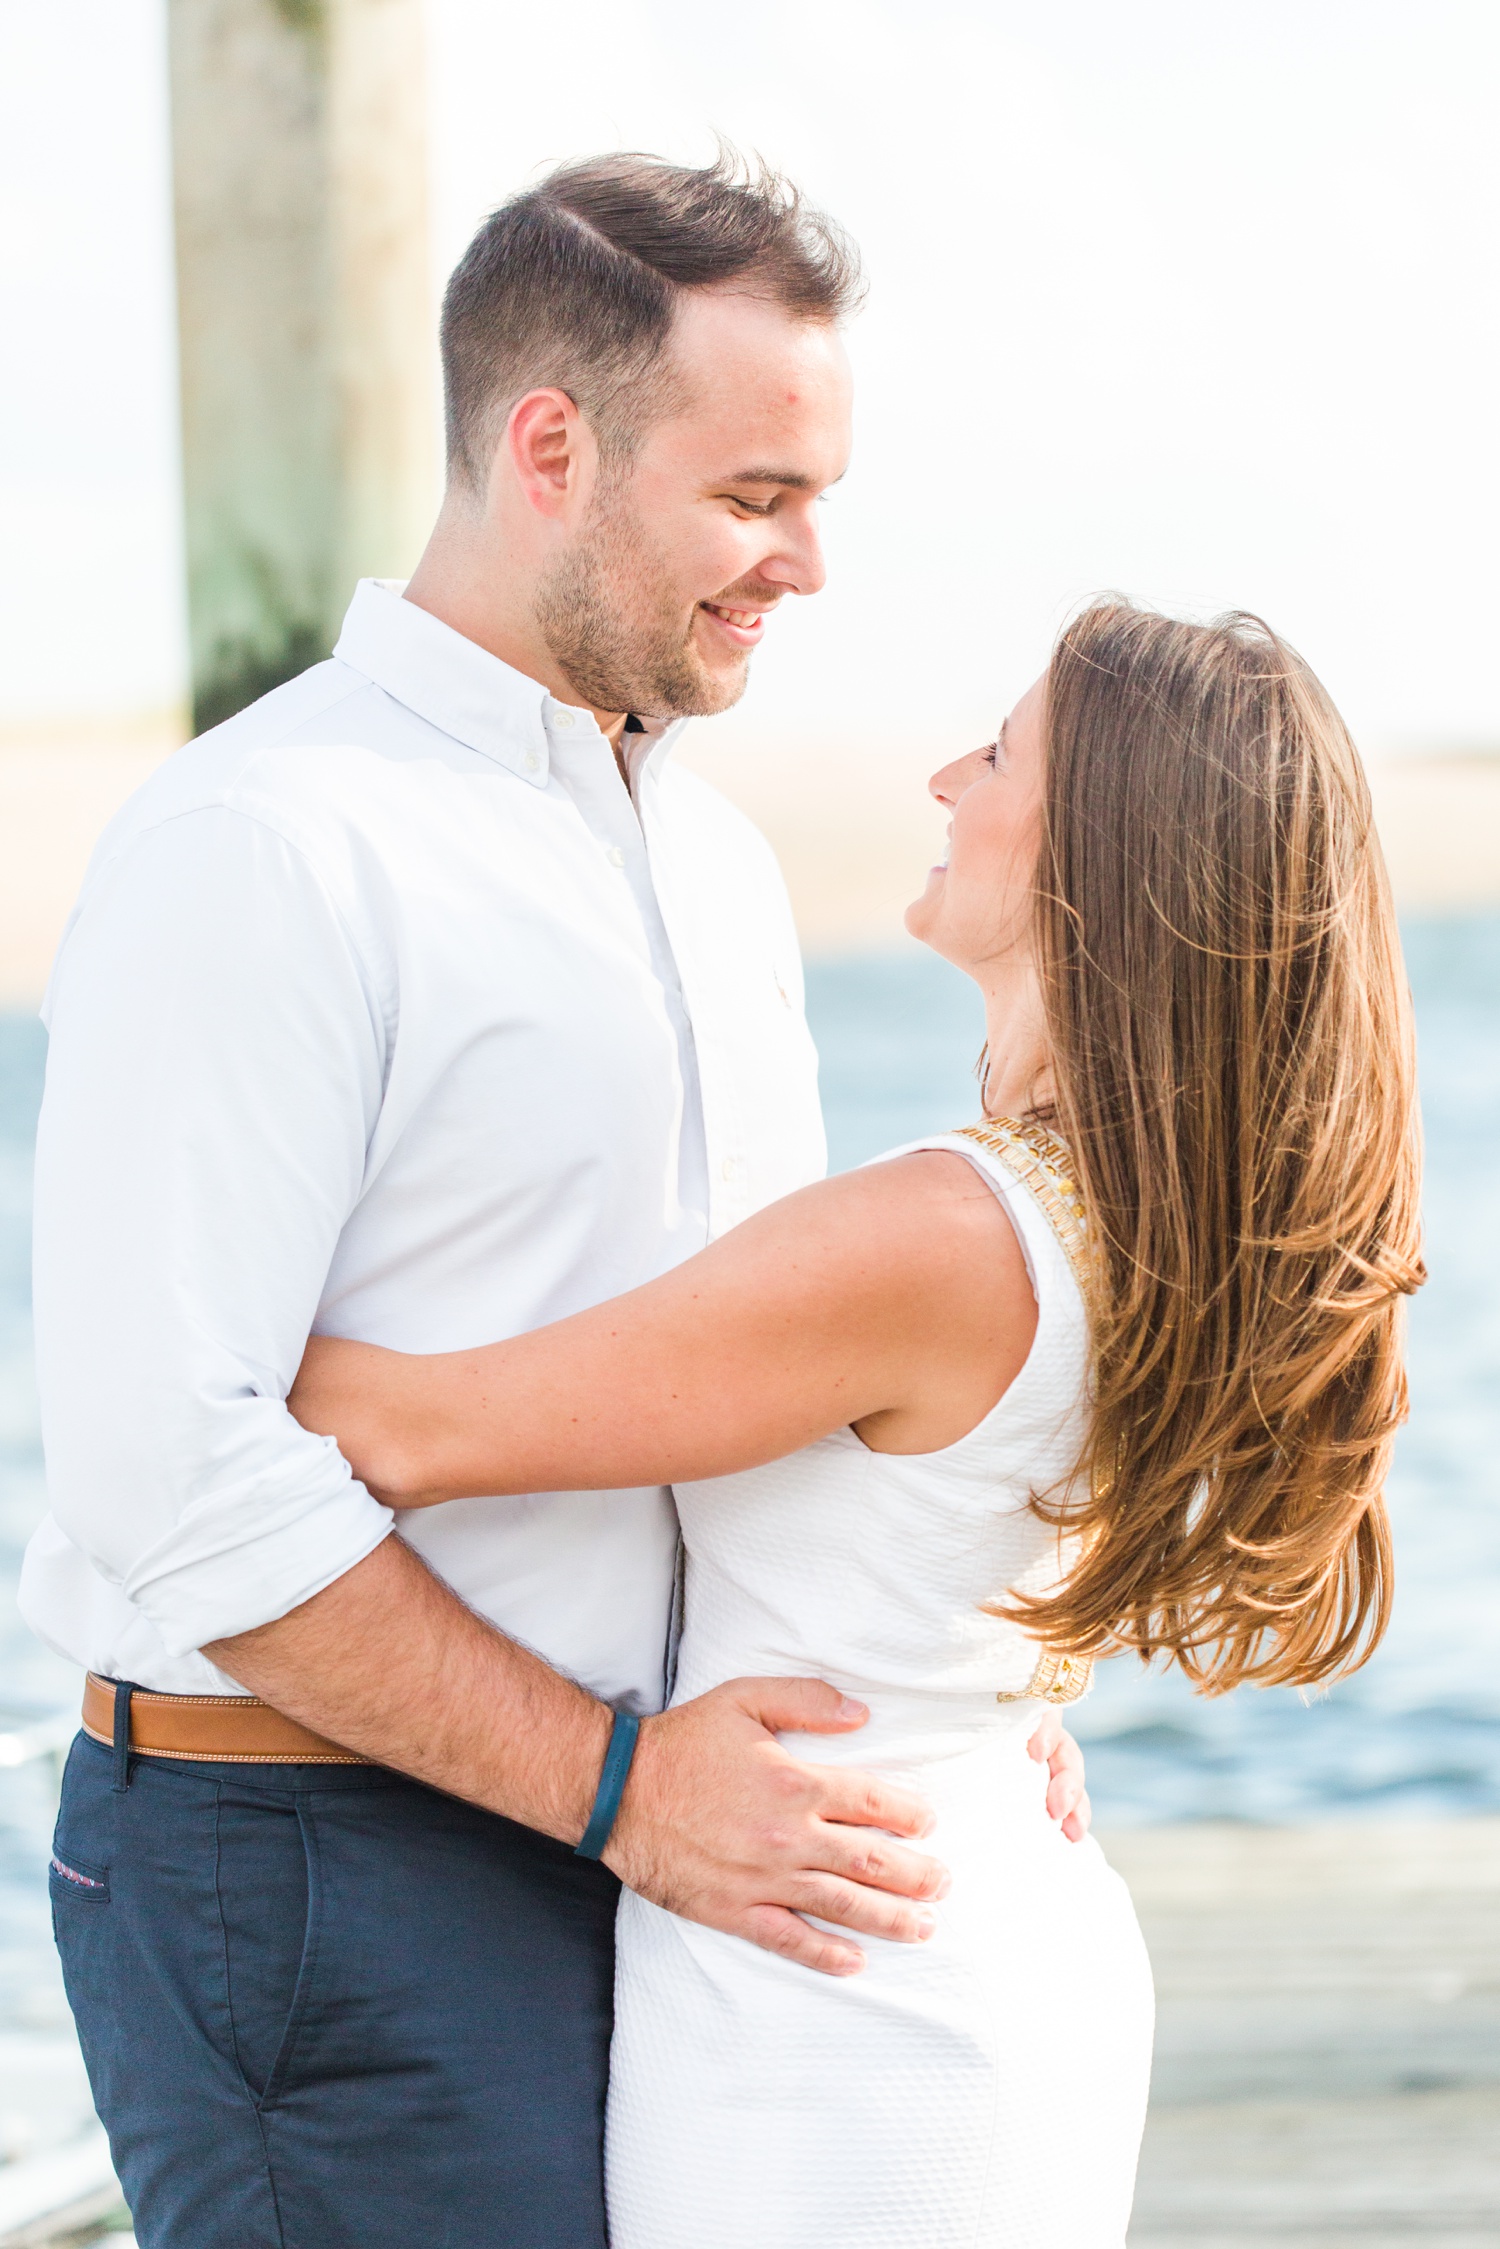 southport-beach-engagement-session-fairfield-ct-top-connecticut-nyc-destination-wedding-photographer-shaina-lee-photography-photo